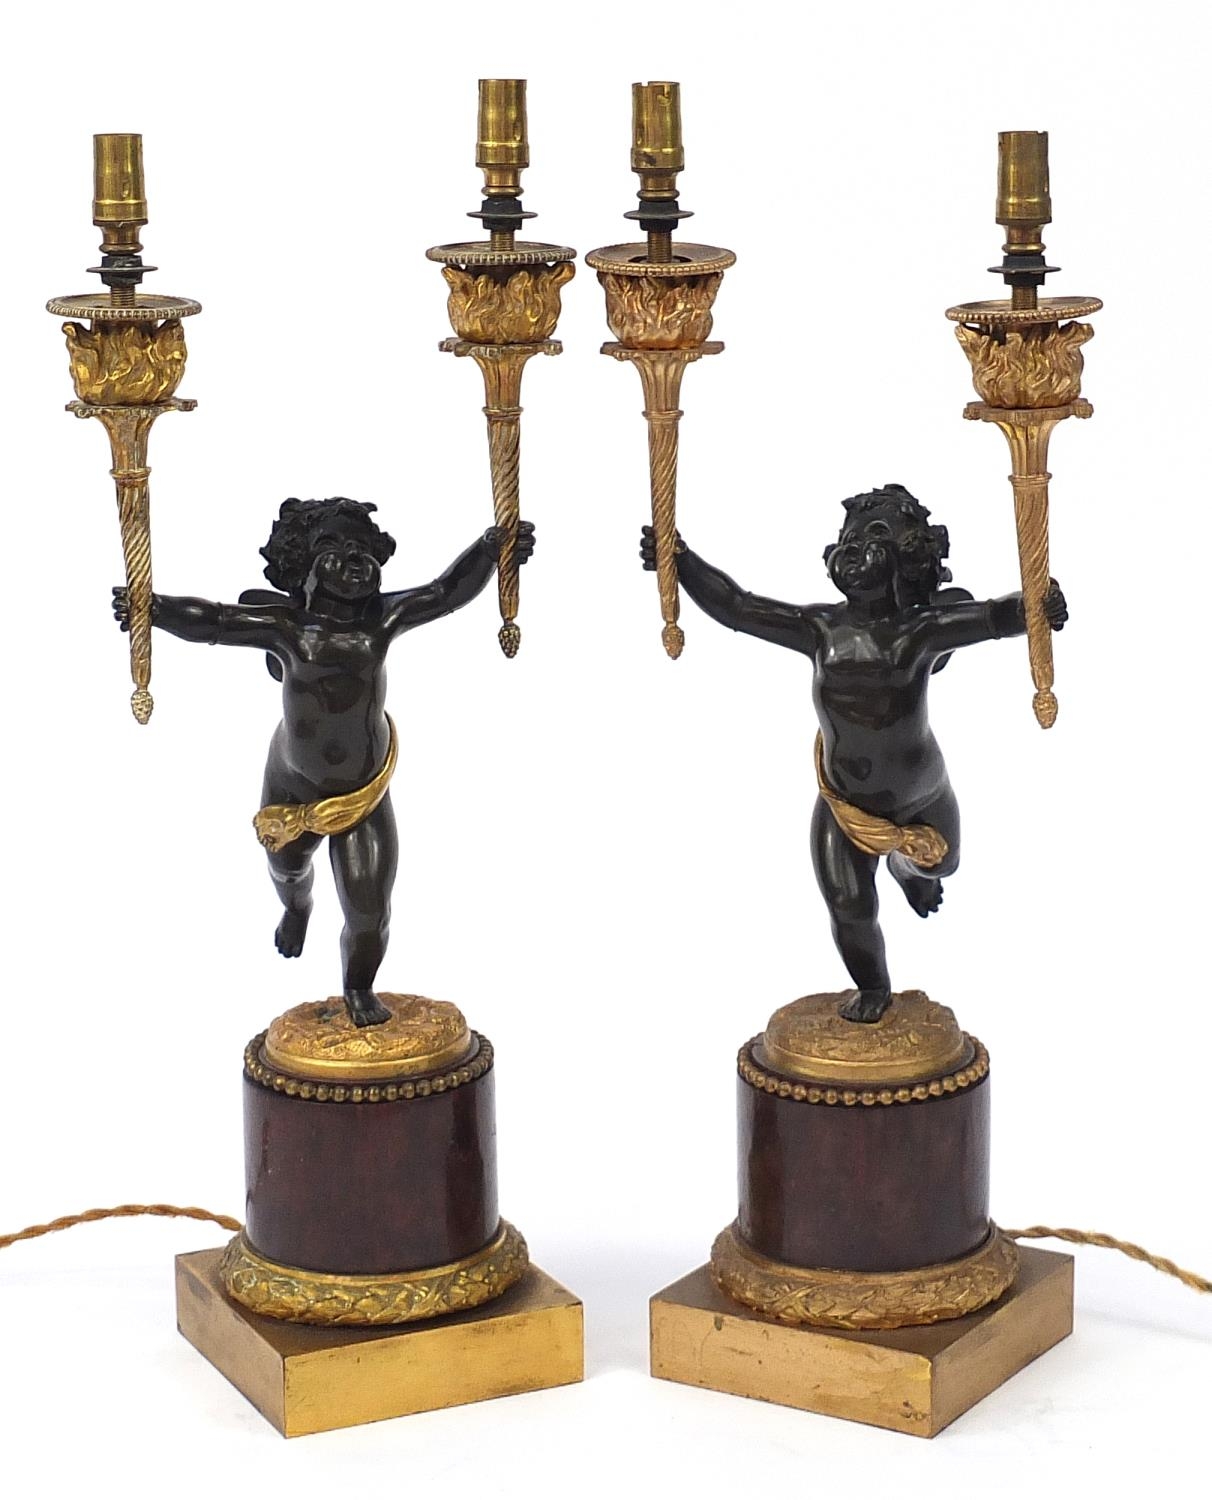 Pair of 19th century ormolu and marble Putti design two branch candelabras converted to electric